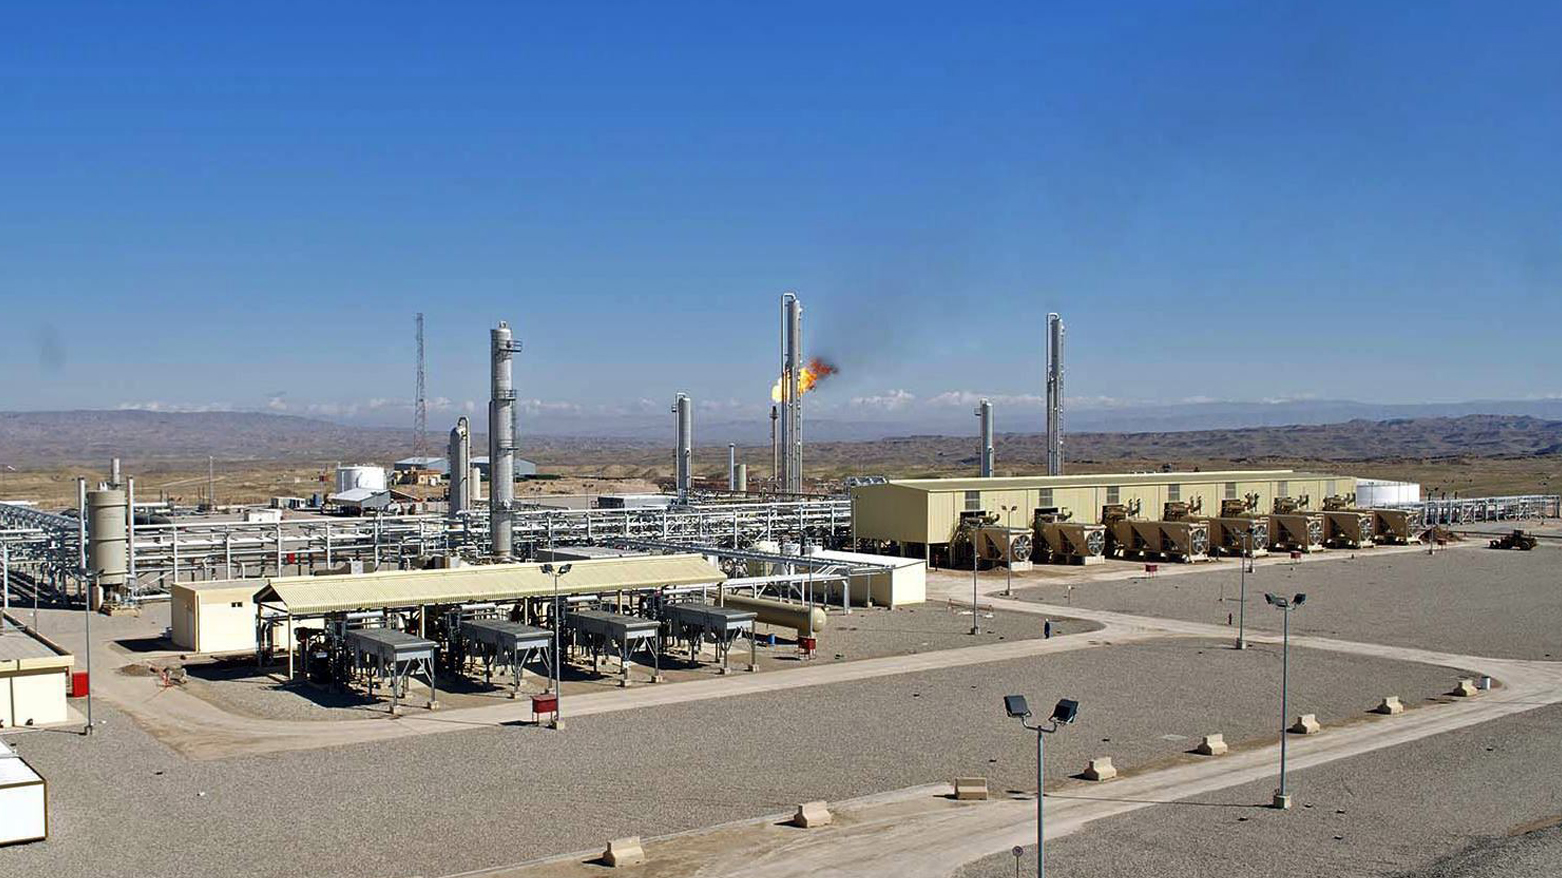 Electricity Ministry power supply reduced in northern Iraq due to Khor Mor gas field shutdown